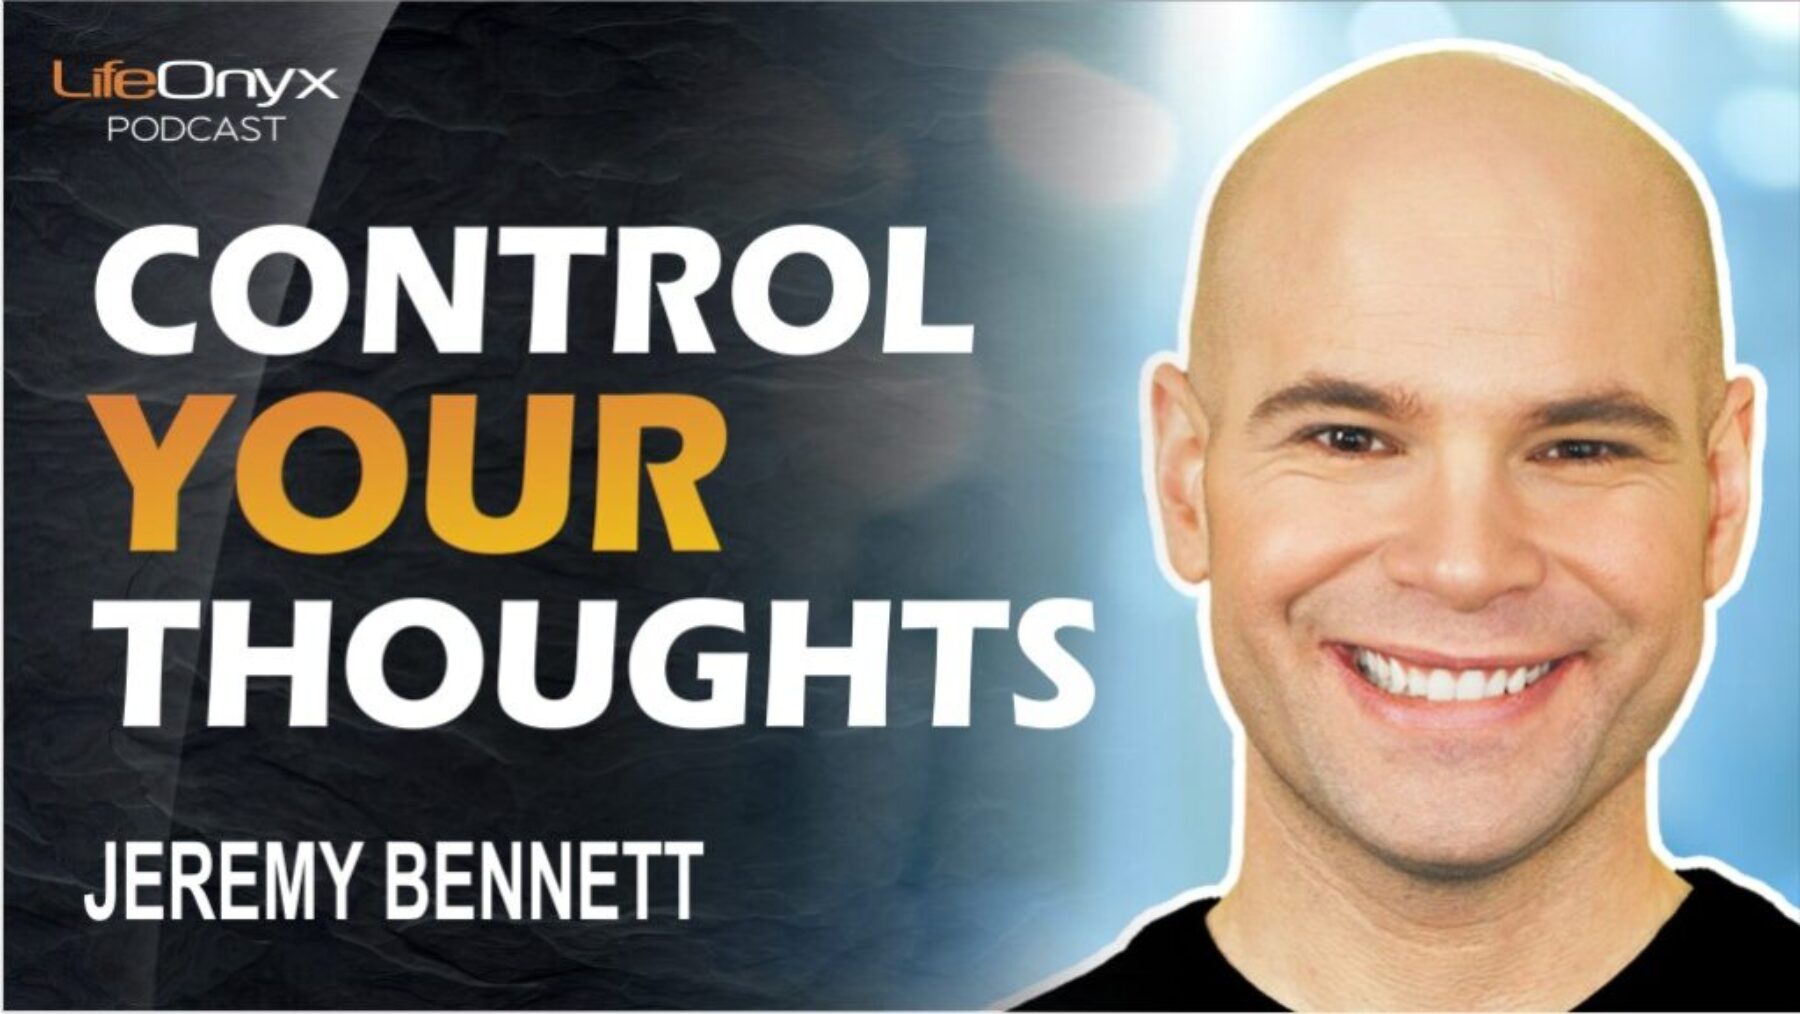 Control Your Thoughts with Jeremy Bennett - LifeOnyx